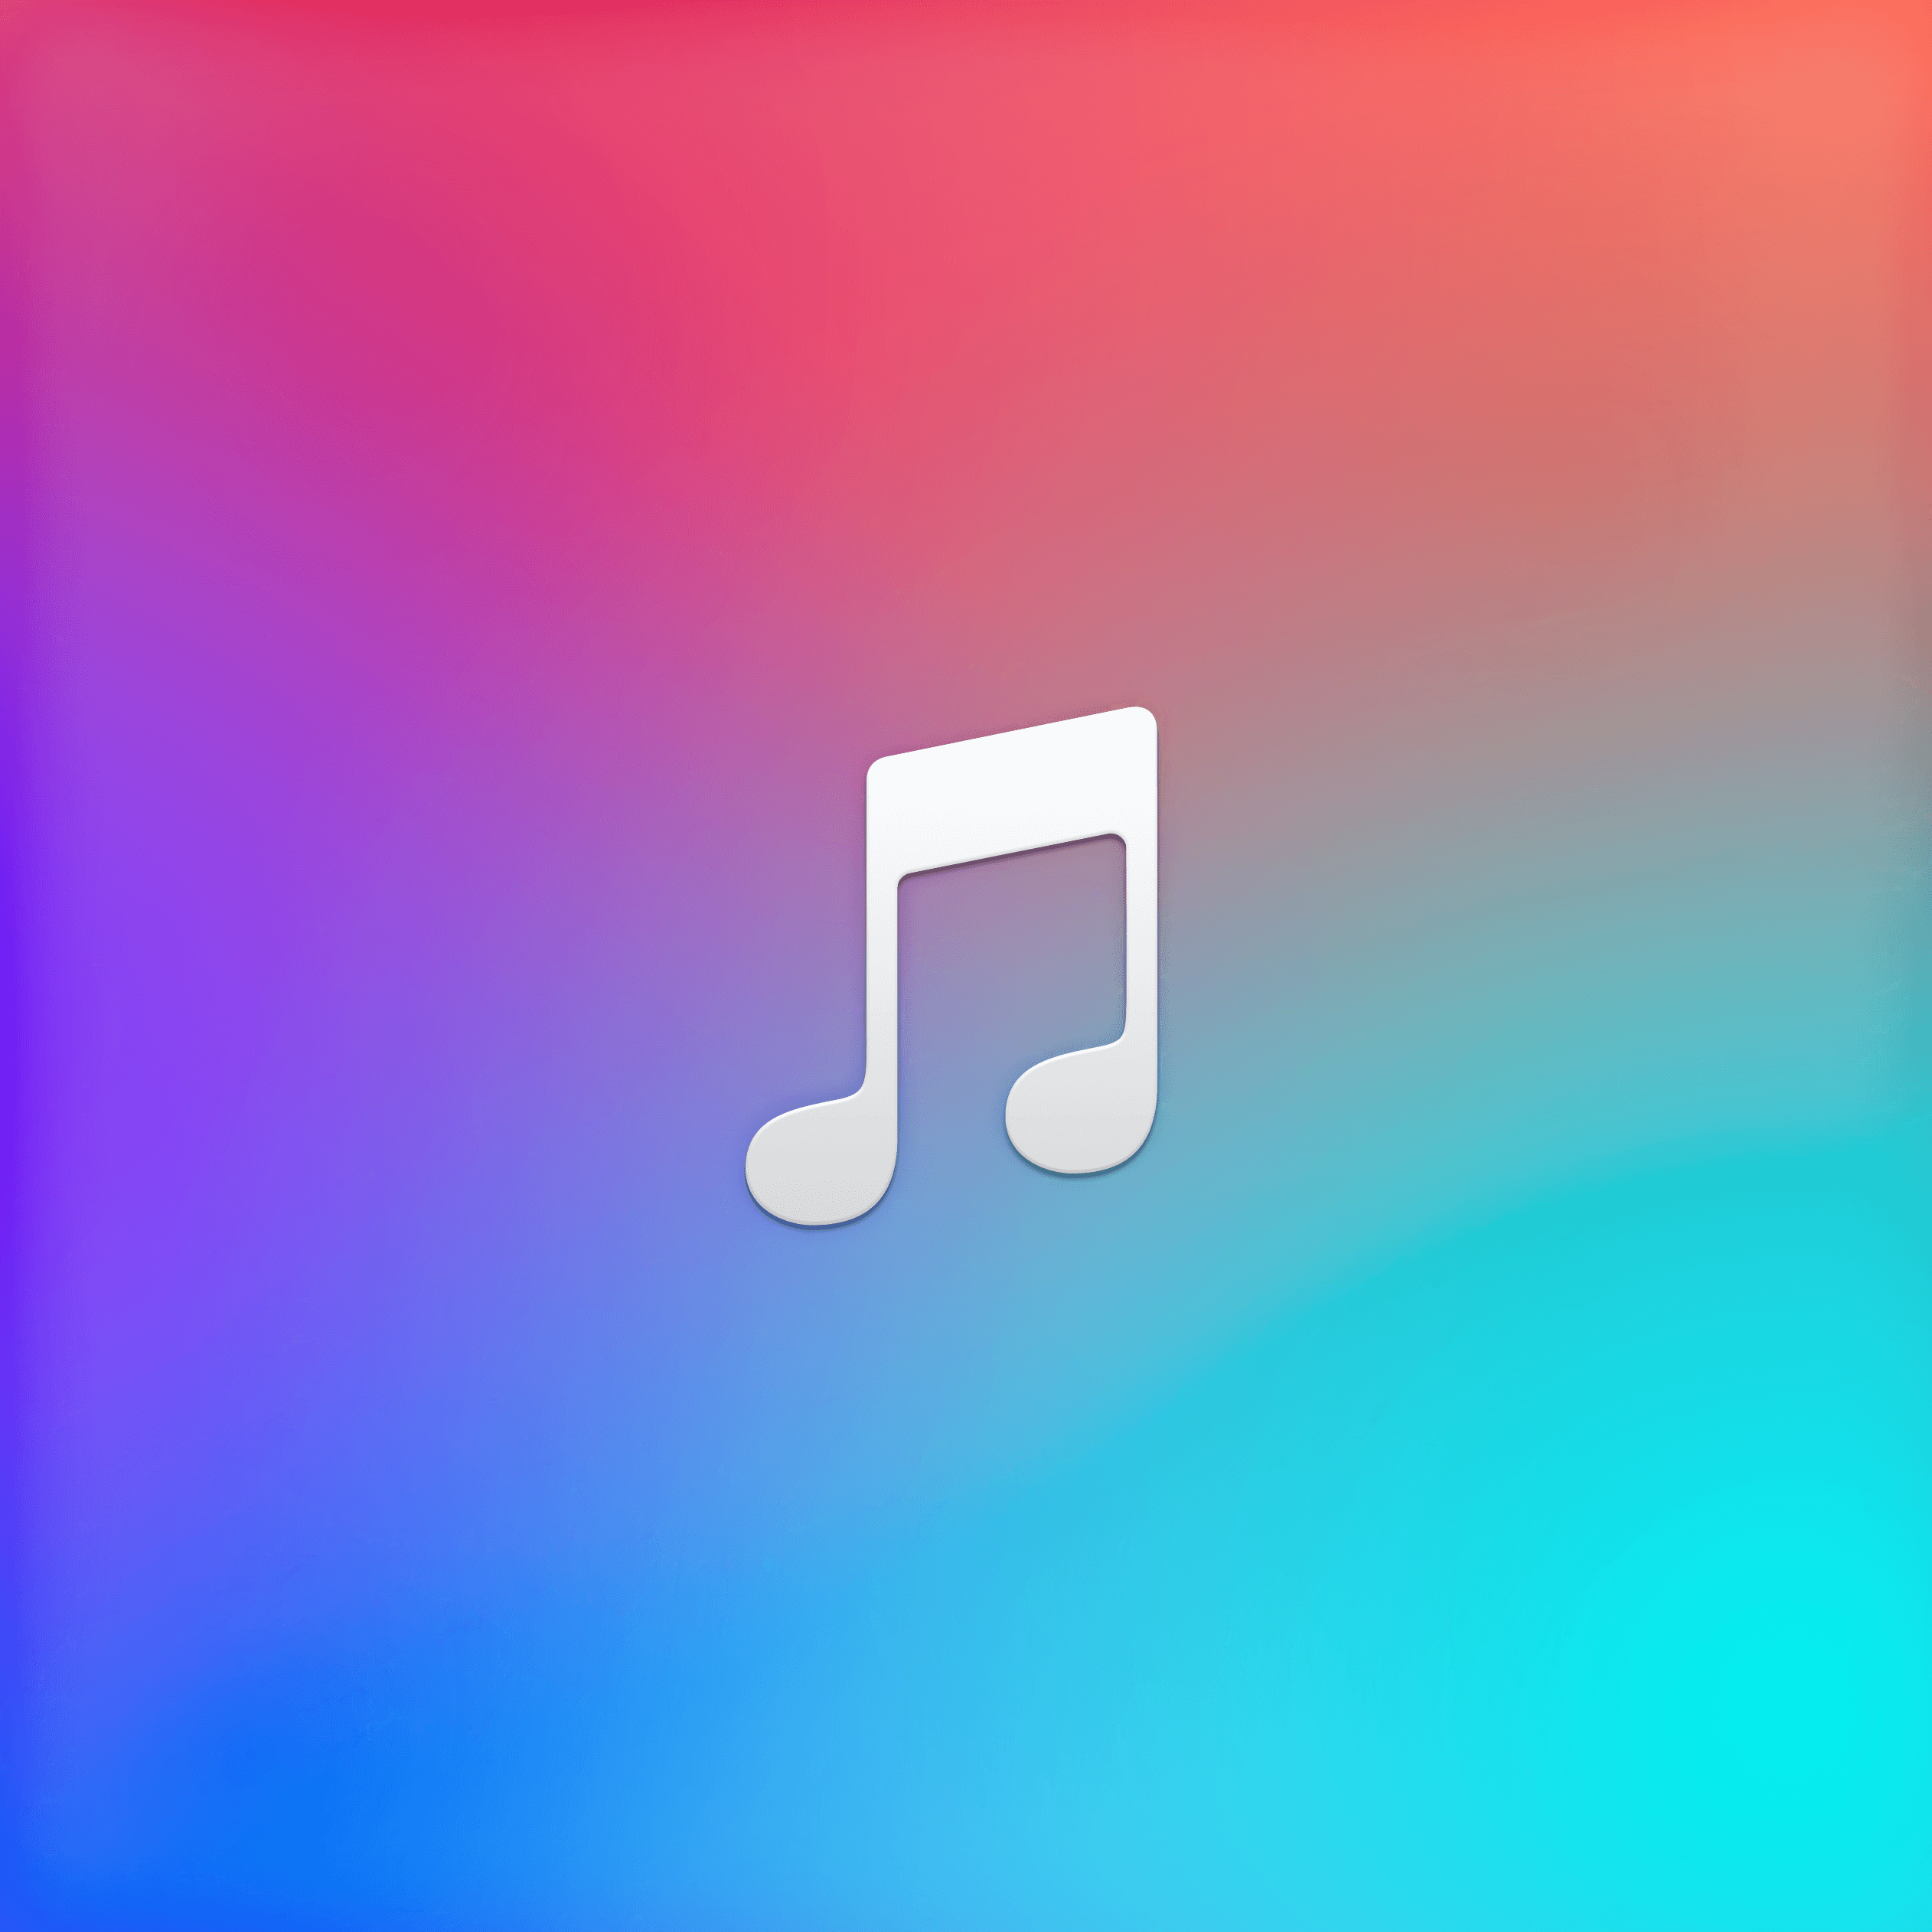 Apple Music Inspired Wallpaper For IPad, IPhone, And Apple Watch